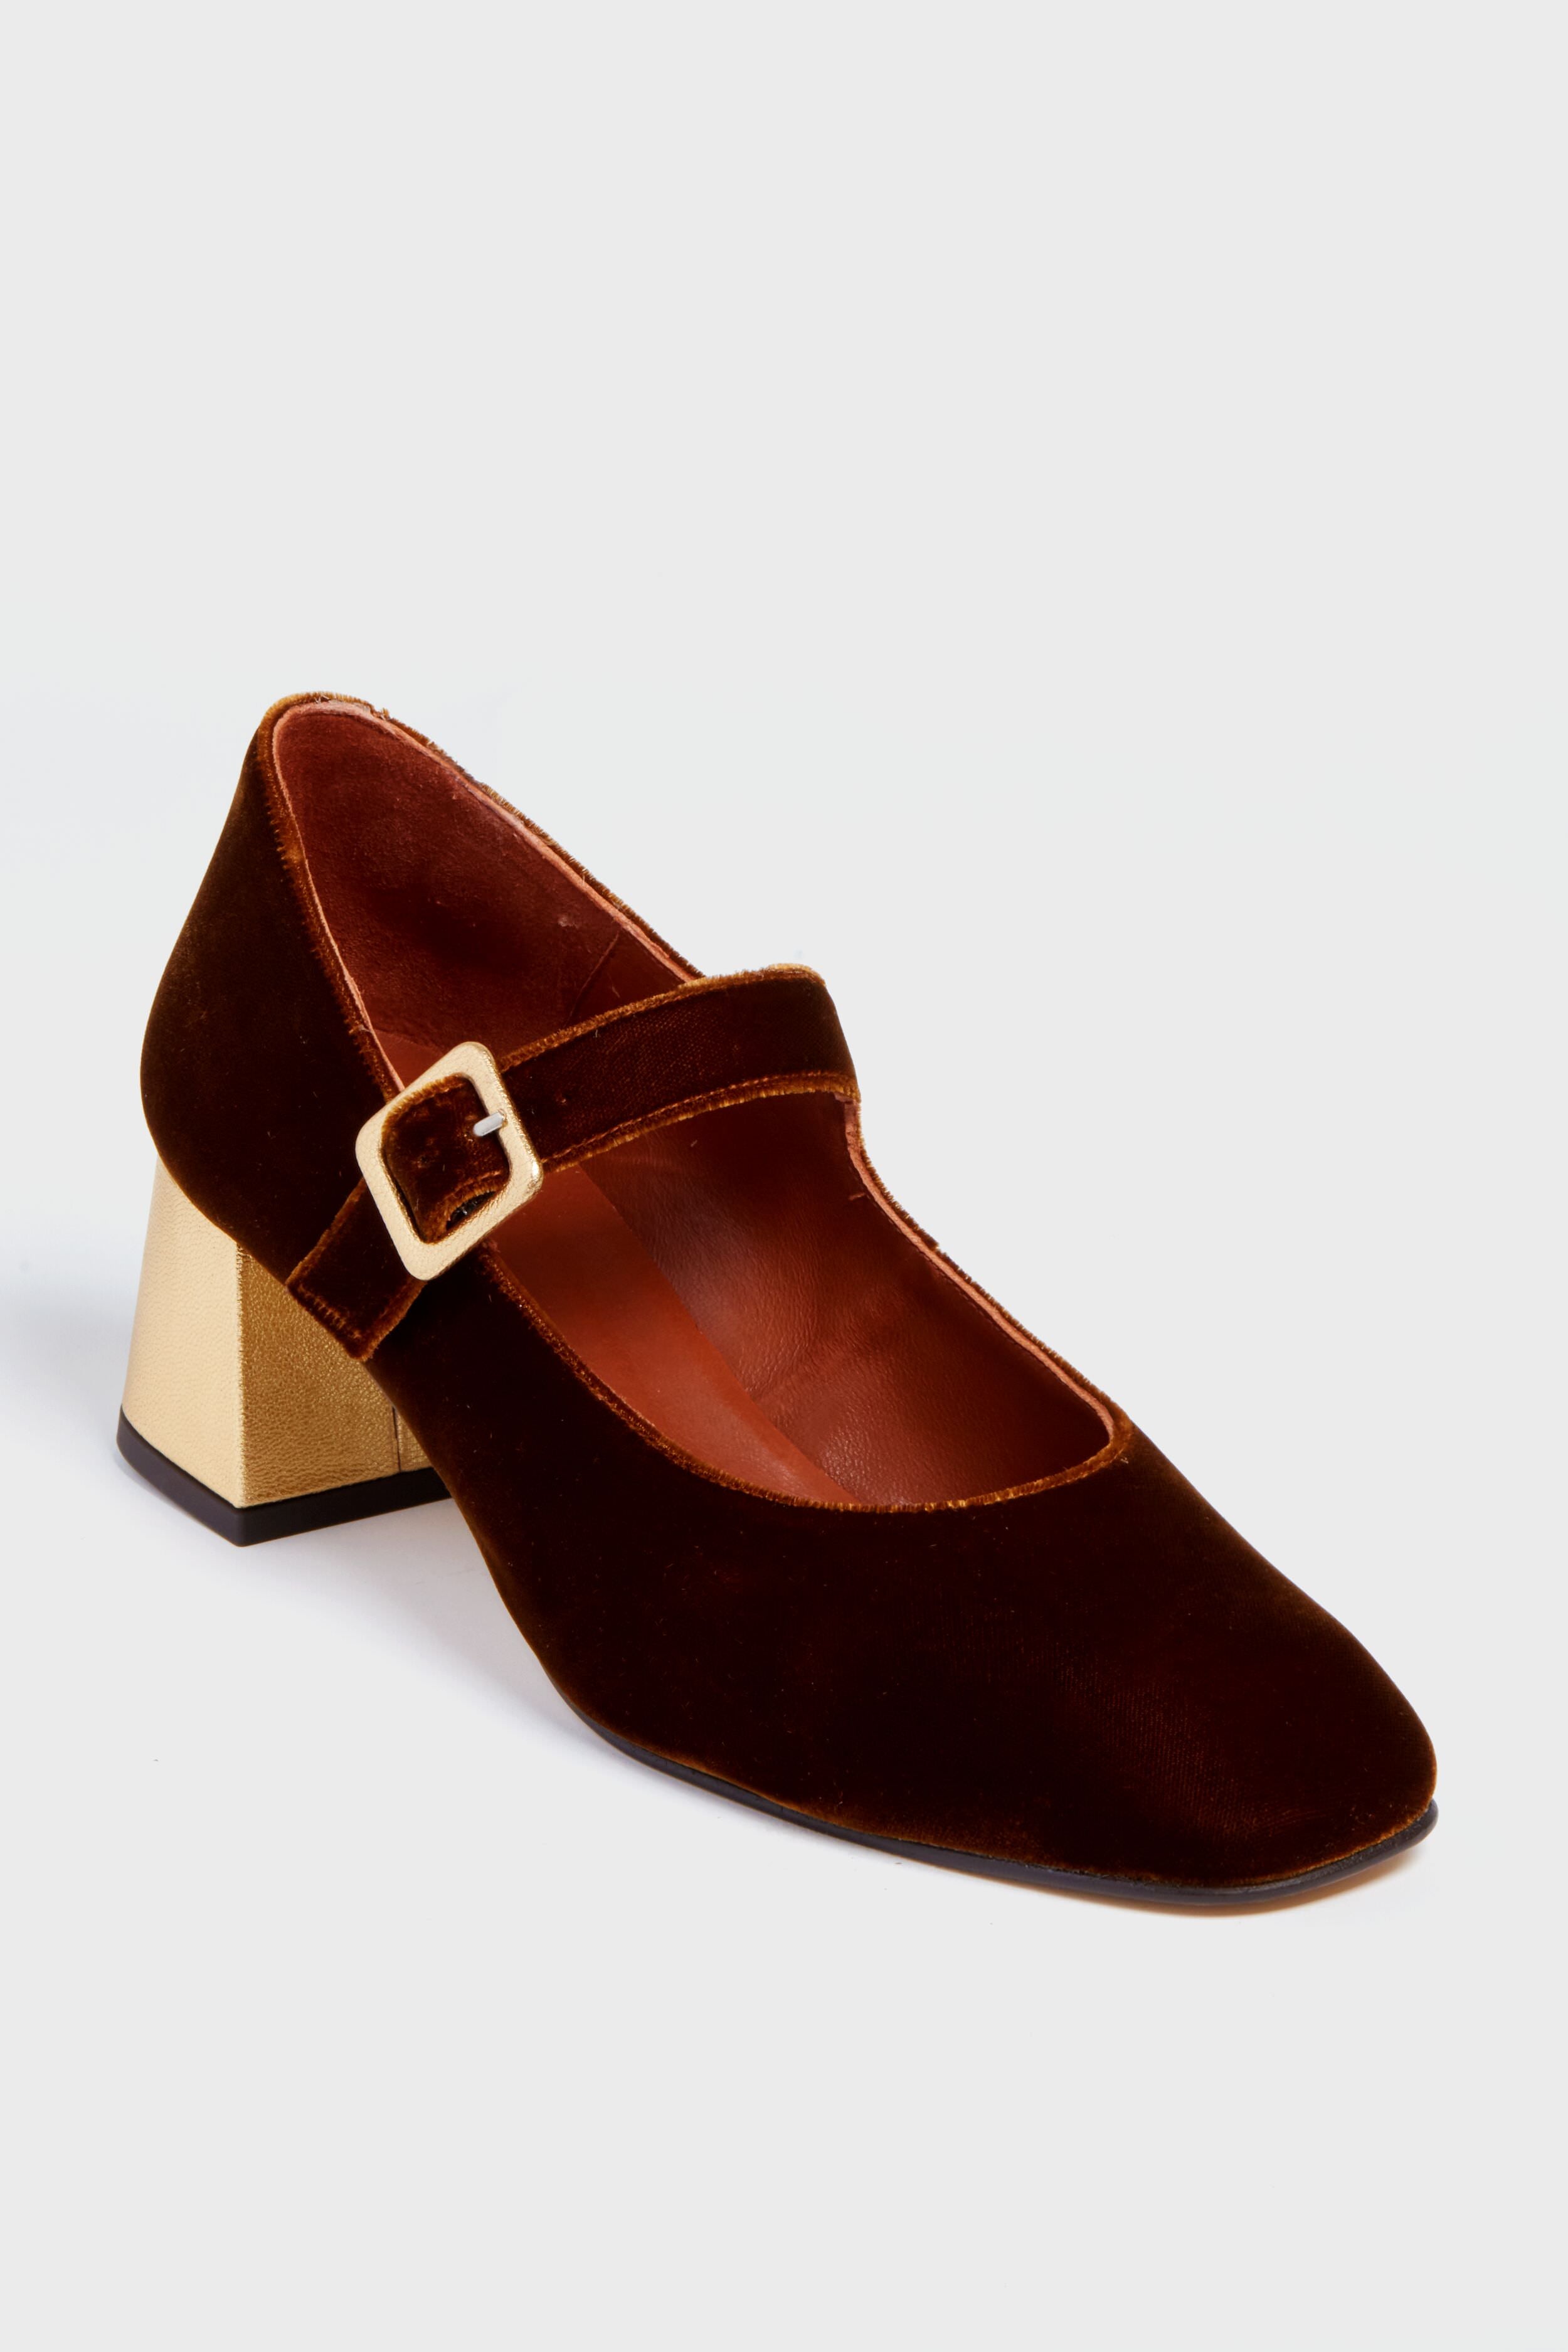 Honey and Gold Velvet Mid Mary Janes | Penelope Chilvers